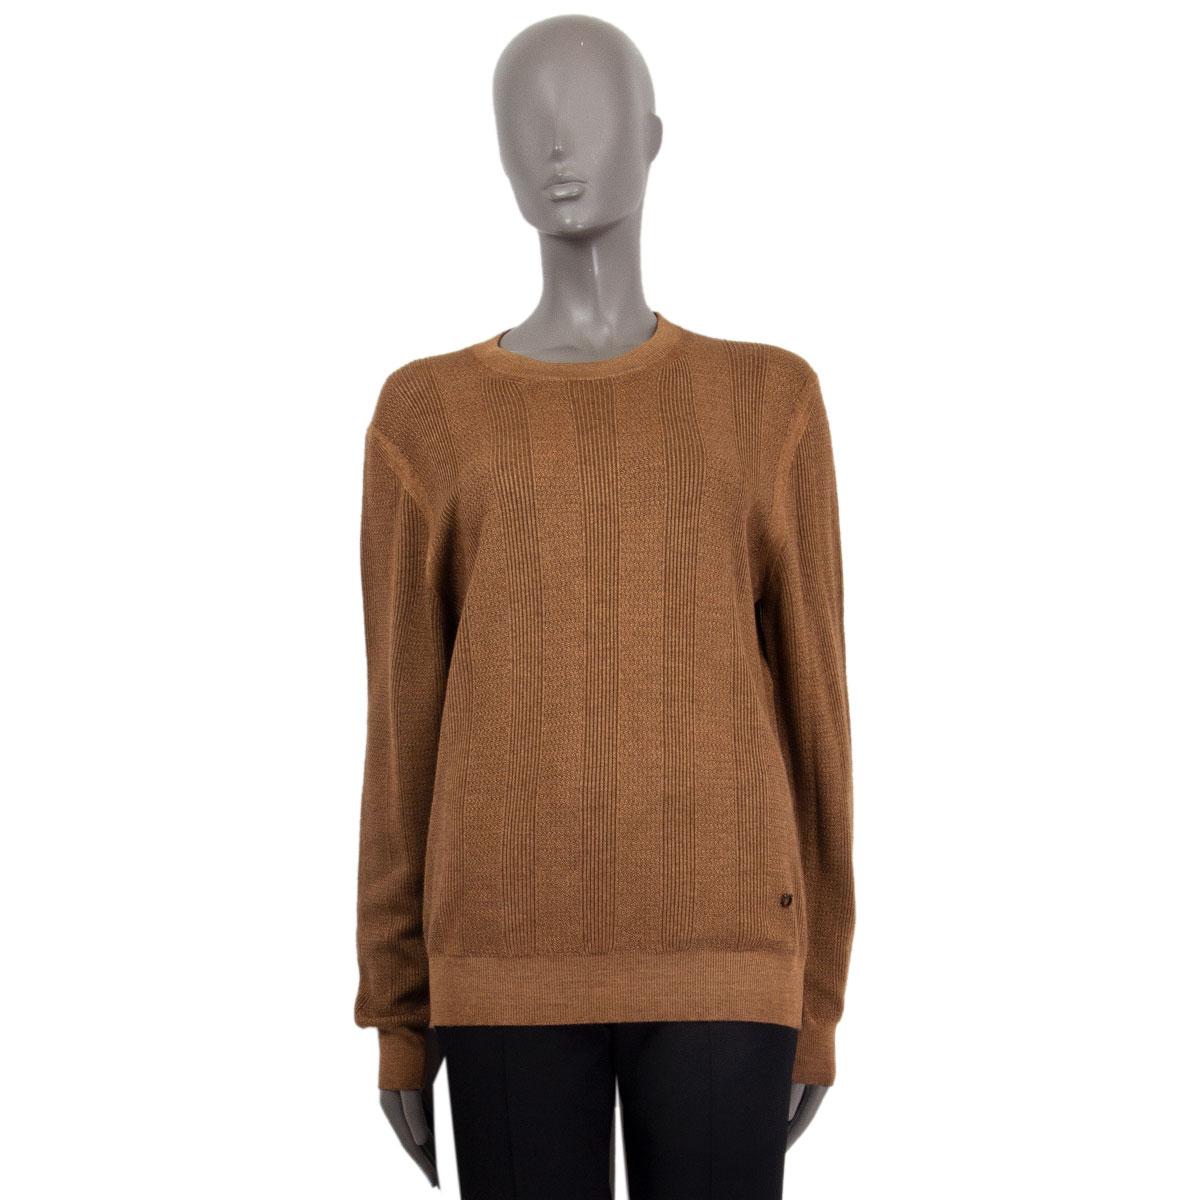 Salvatore Ferragamo ribbed knit crew-neck sweater in ochre virgin wool (60%), cashmere (30%) and silk (20%). Has been worn and is in excellent condition. 

Tag Size M
Size M
Shoulder Width 48cm (18.7in)
Bust 106cm (41.3in)
Waist 102cm (39.8in)
Hips